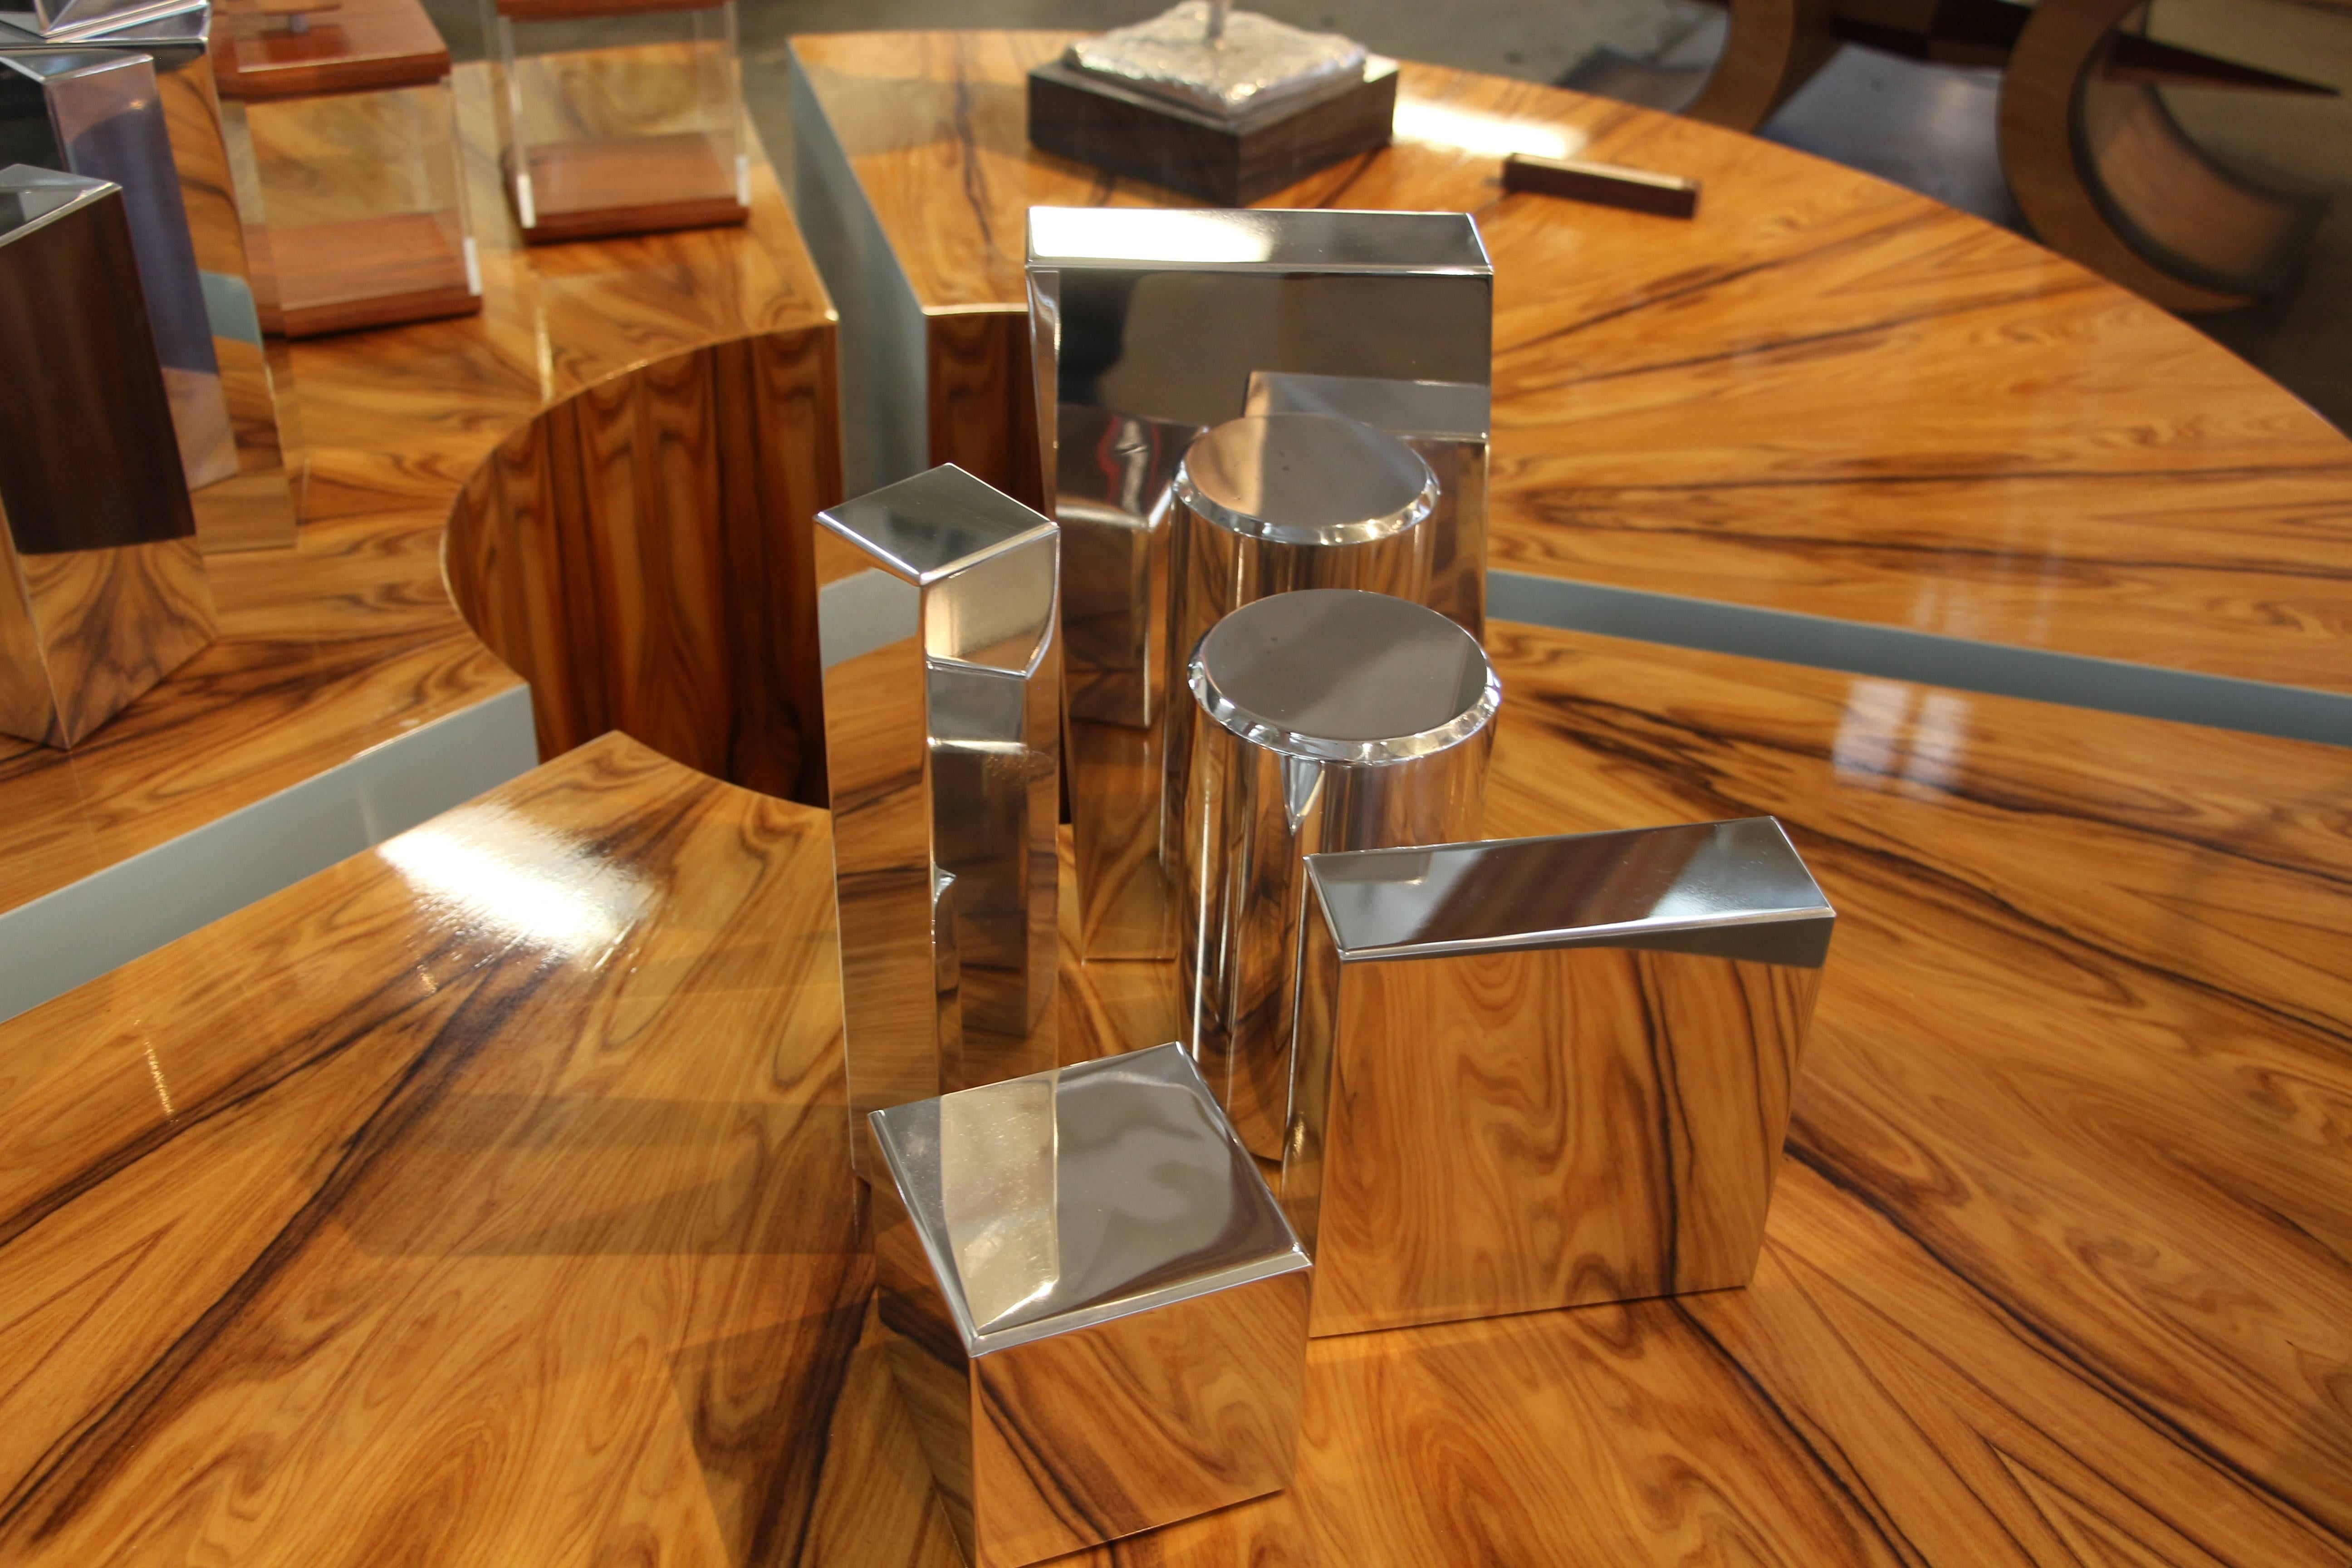 Our gallery is proud to represent an new talented artist Casey Cross who now resides in Palm Springs, CA. His work is unique and quite unusual. These geometric shapes can be arranged in any way. They are polished aluminium shapes. Each piece has